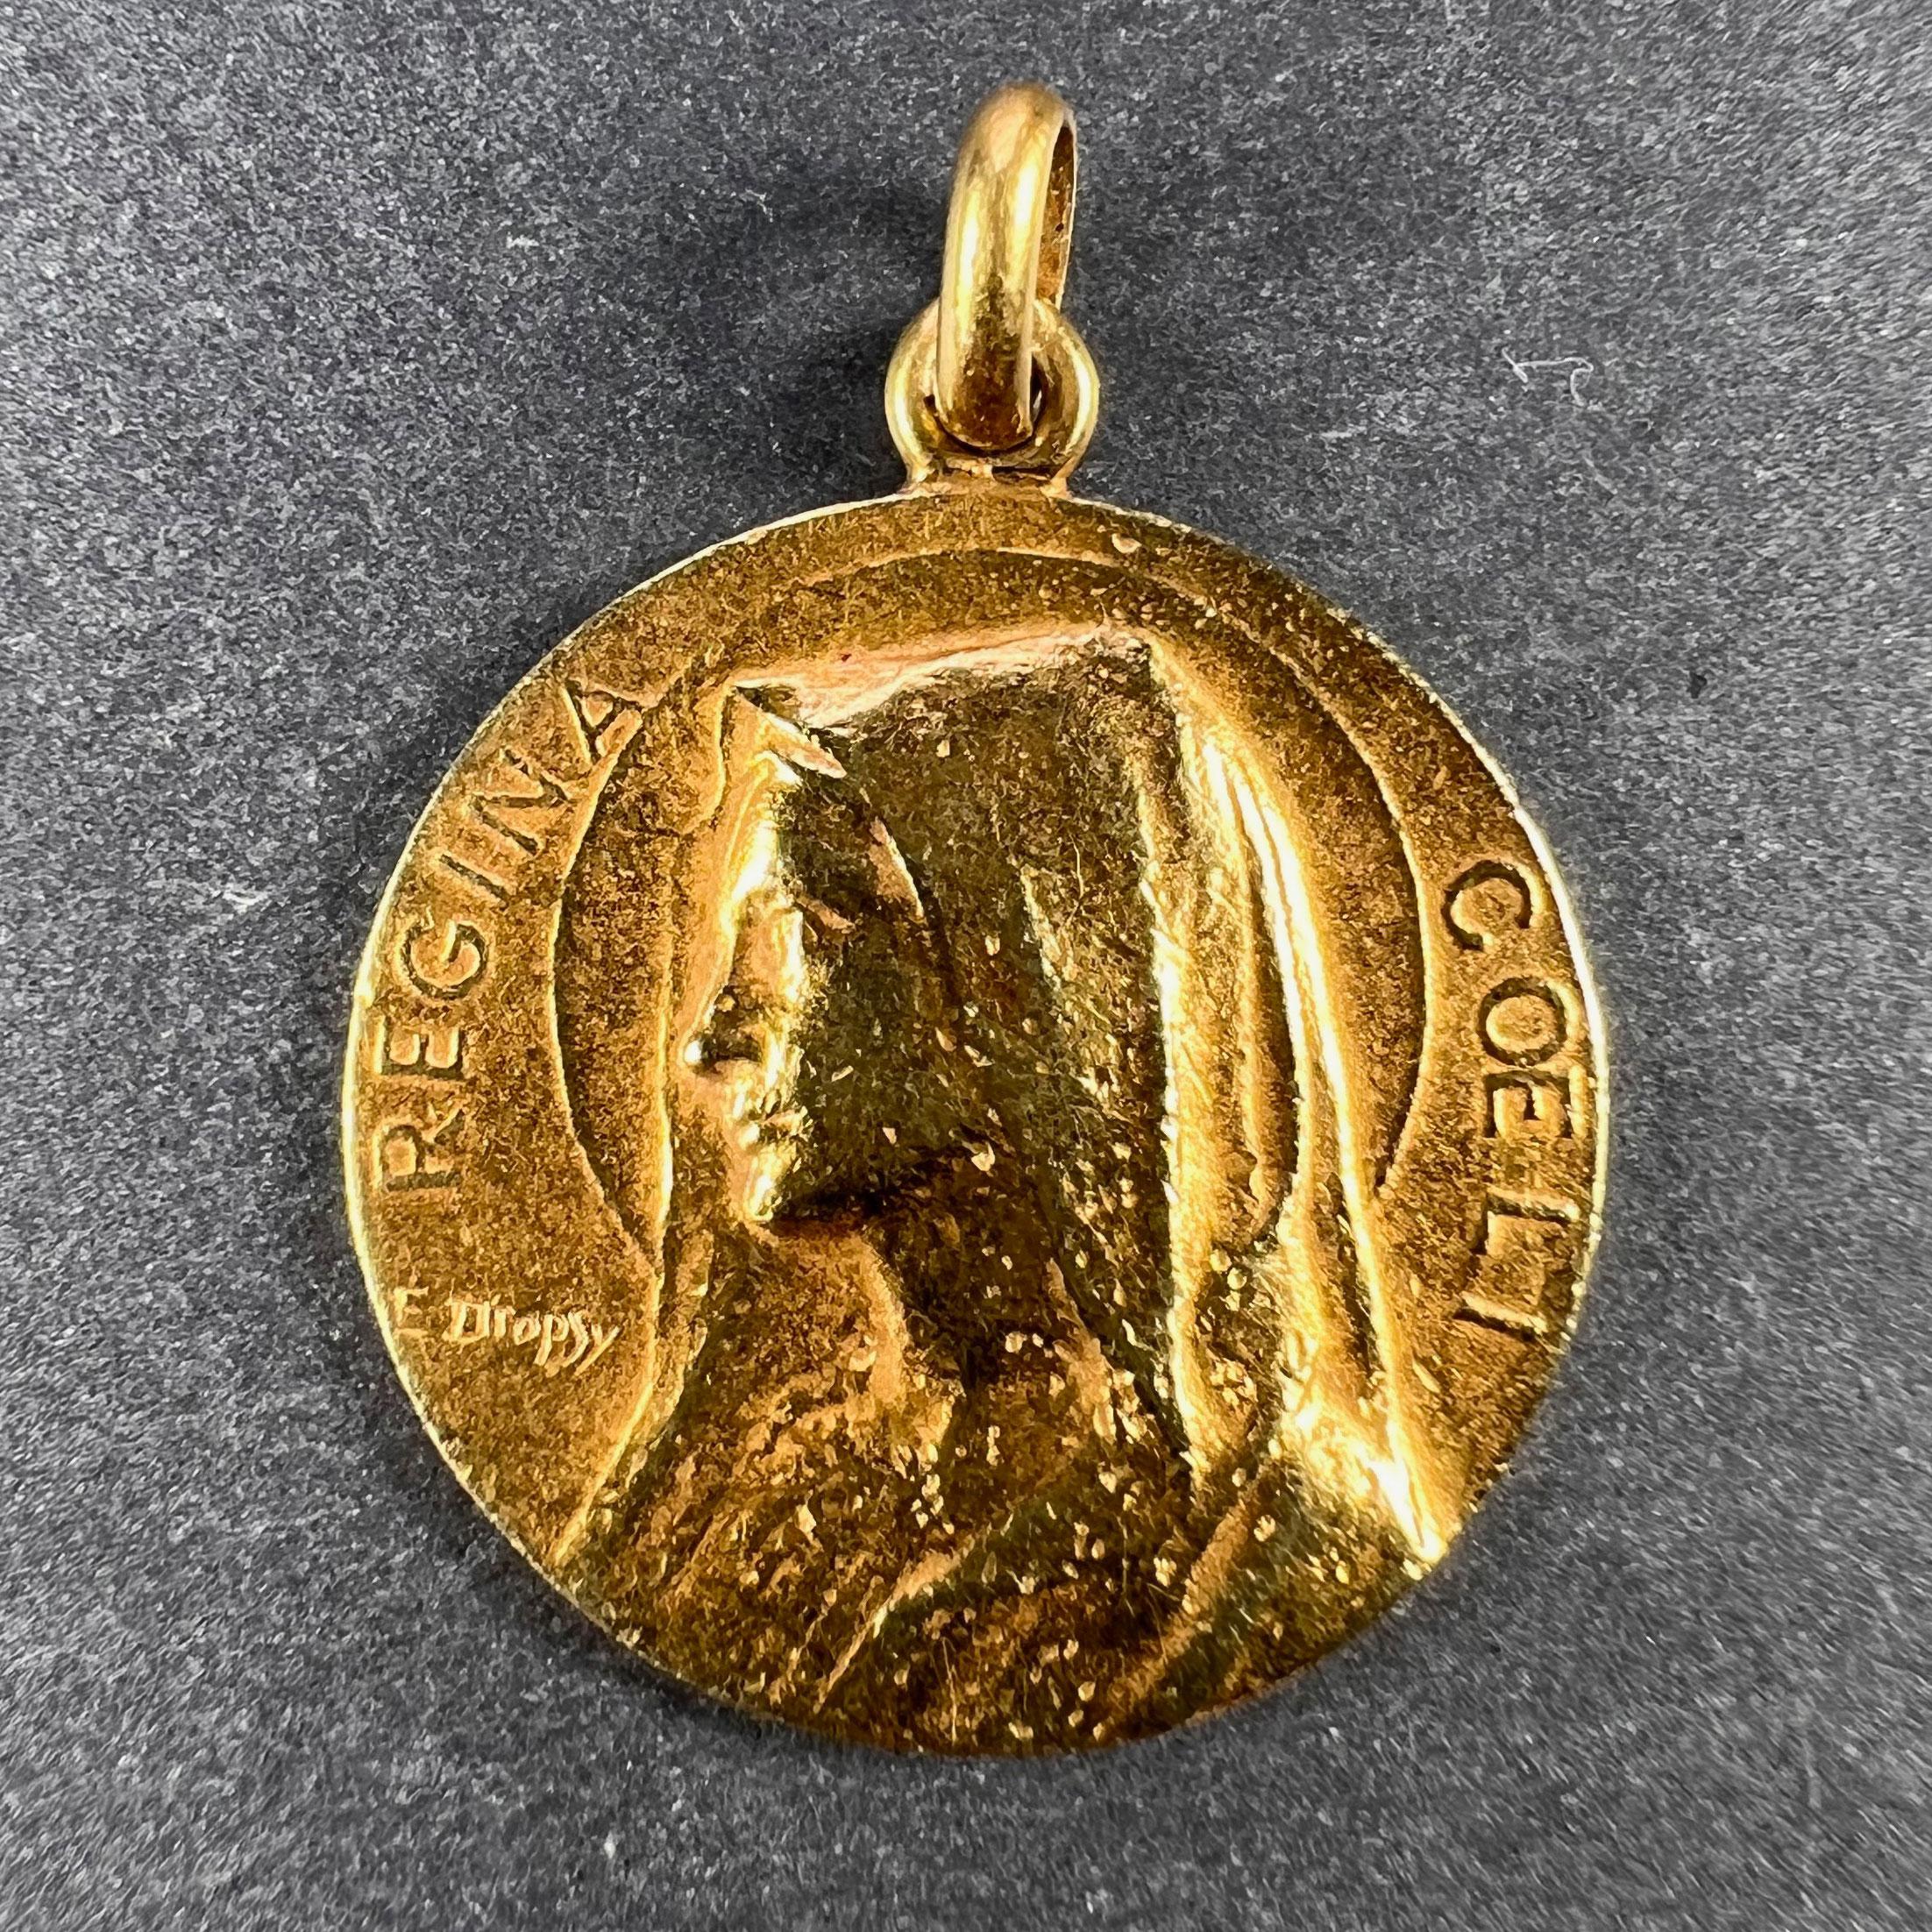 An 18 karat (18K) yellow gold charm pendant designed as a medal depicting the Virgin Mary, detailing the words Regina Coeli for Queen of Heaven. Signed E. Dropsy, stamped with the owl mark for 18 karat gold and French import. The reverse engraved